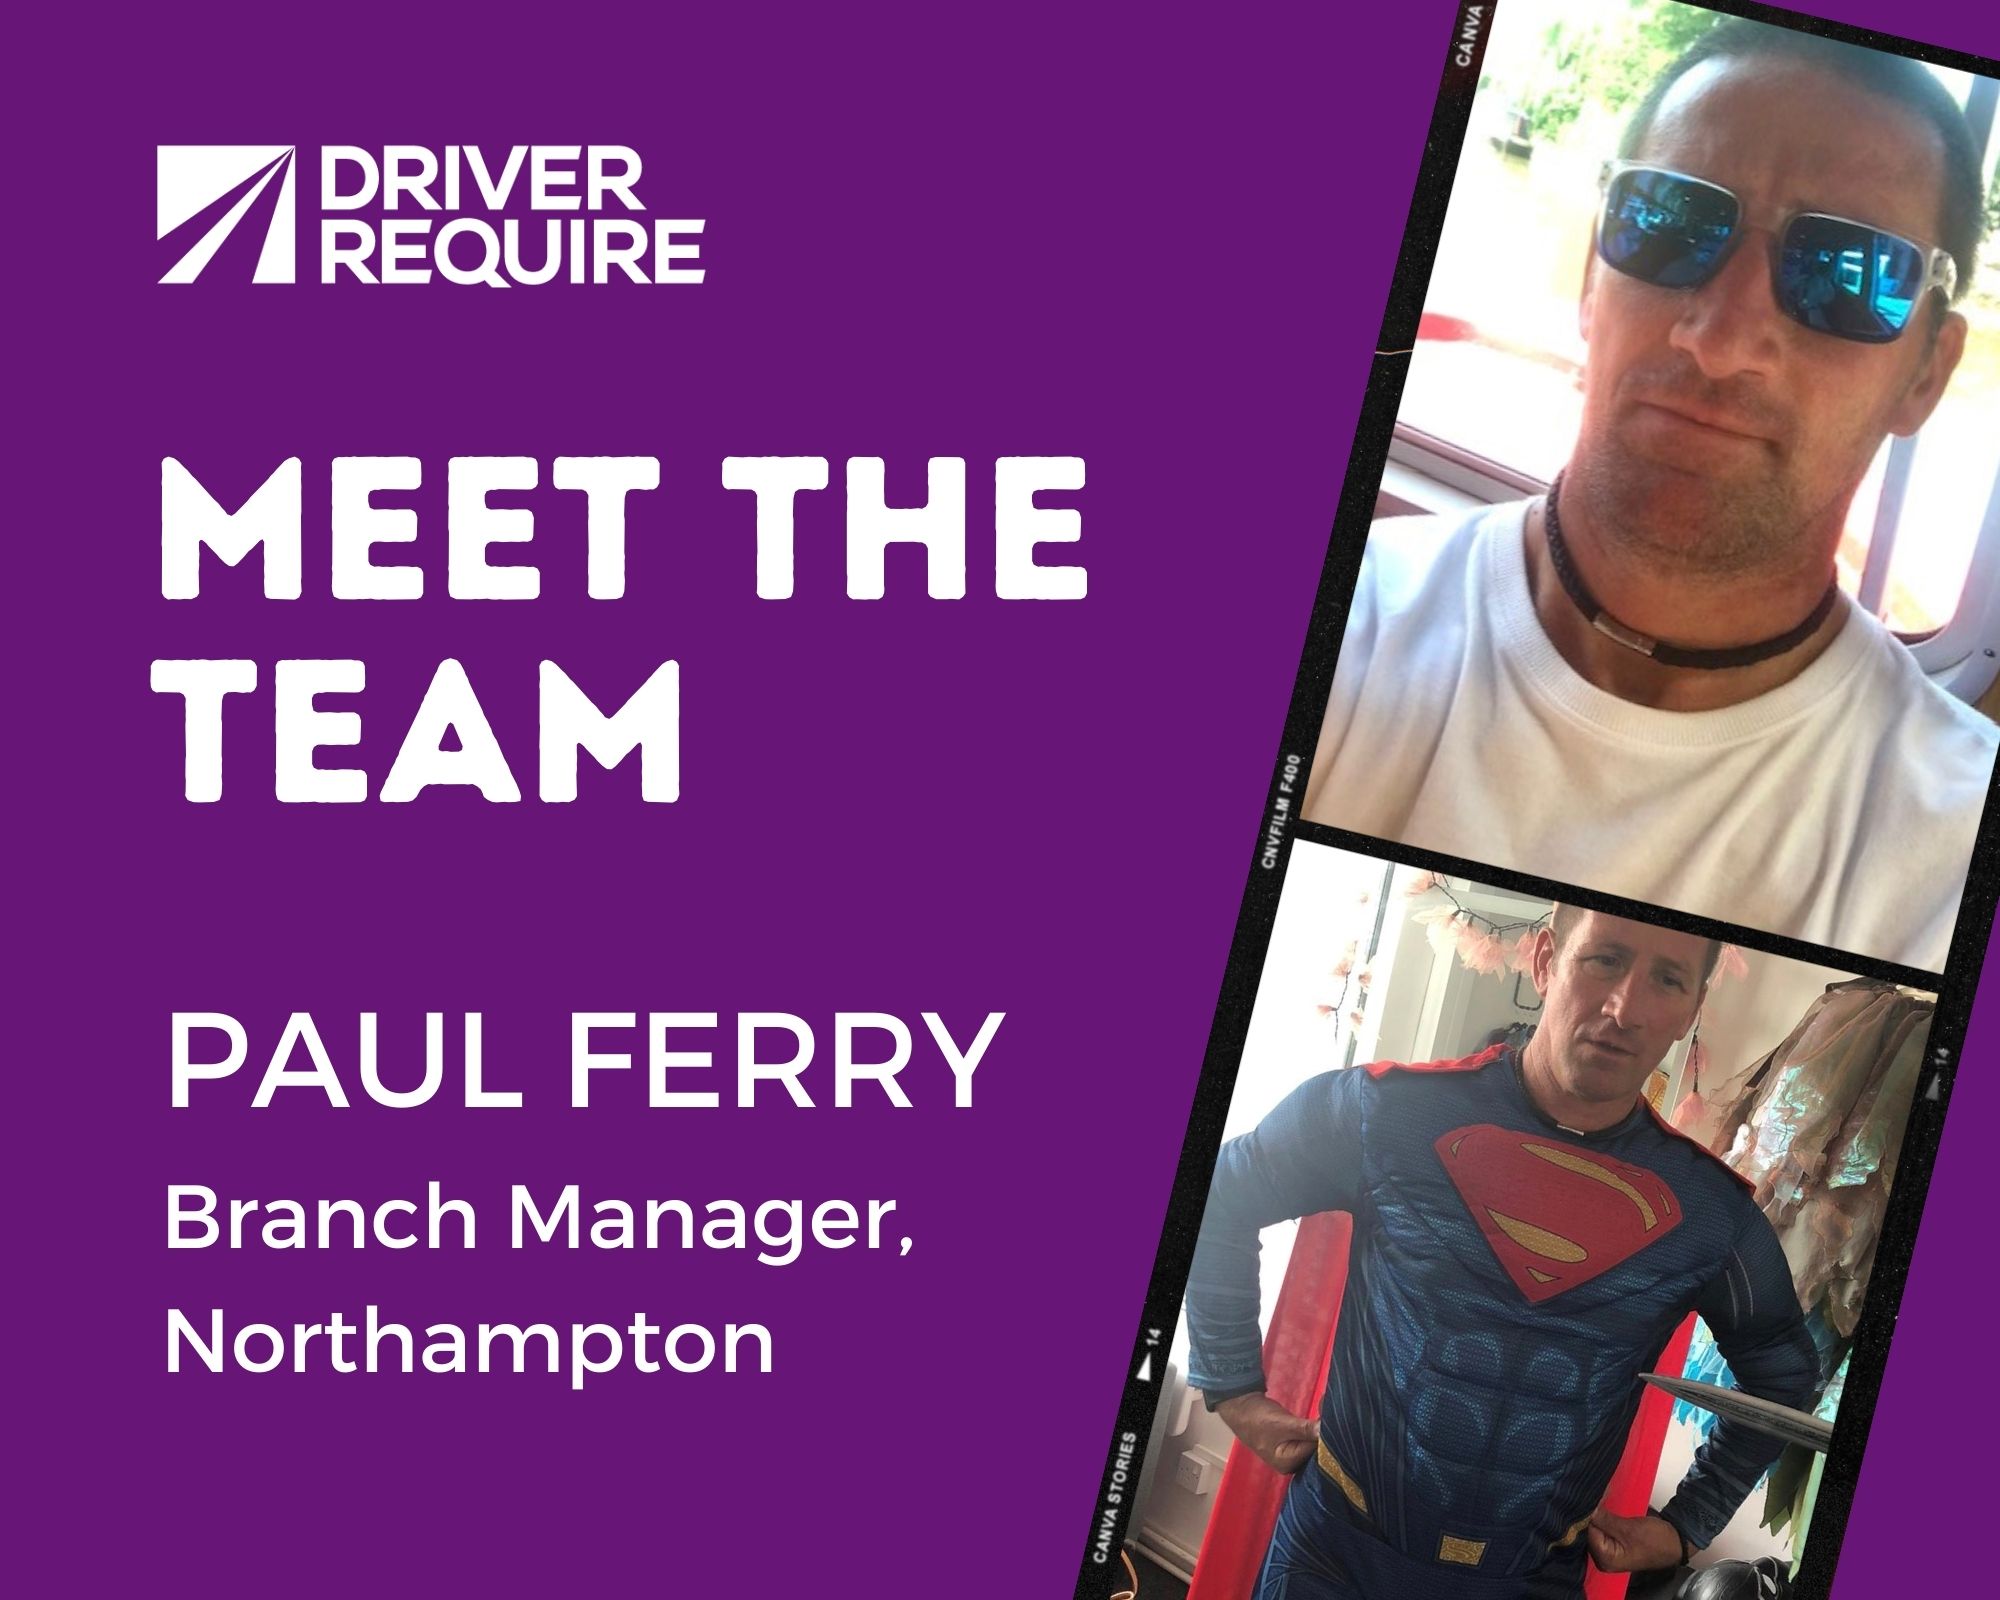 Meet the Team Driver Require Paul Ferry